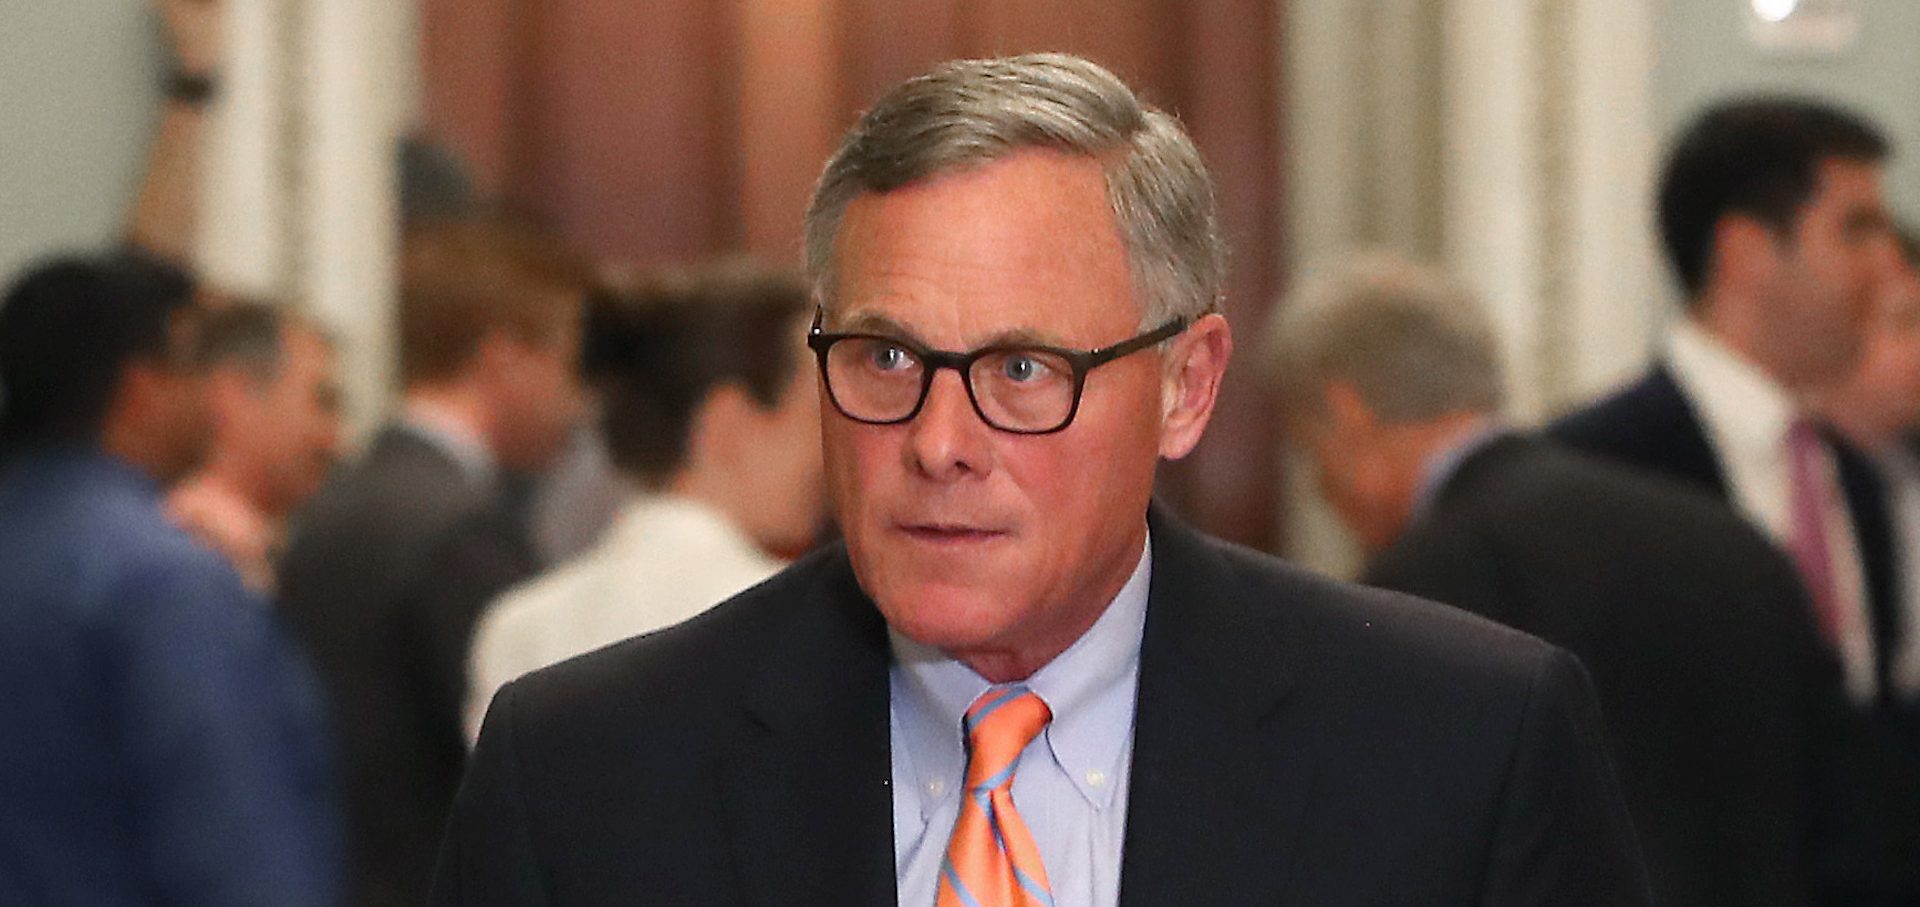 Sen. Richard Burr, R-N.C., leaves Capitol Hill on June 4, 2019. On Feb. 27, 2020, a secret recording of Burr shows him warning people about the impact of the coronavirus on the U.S.